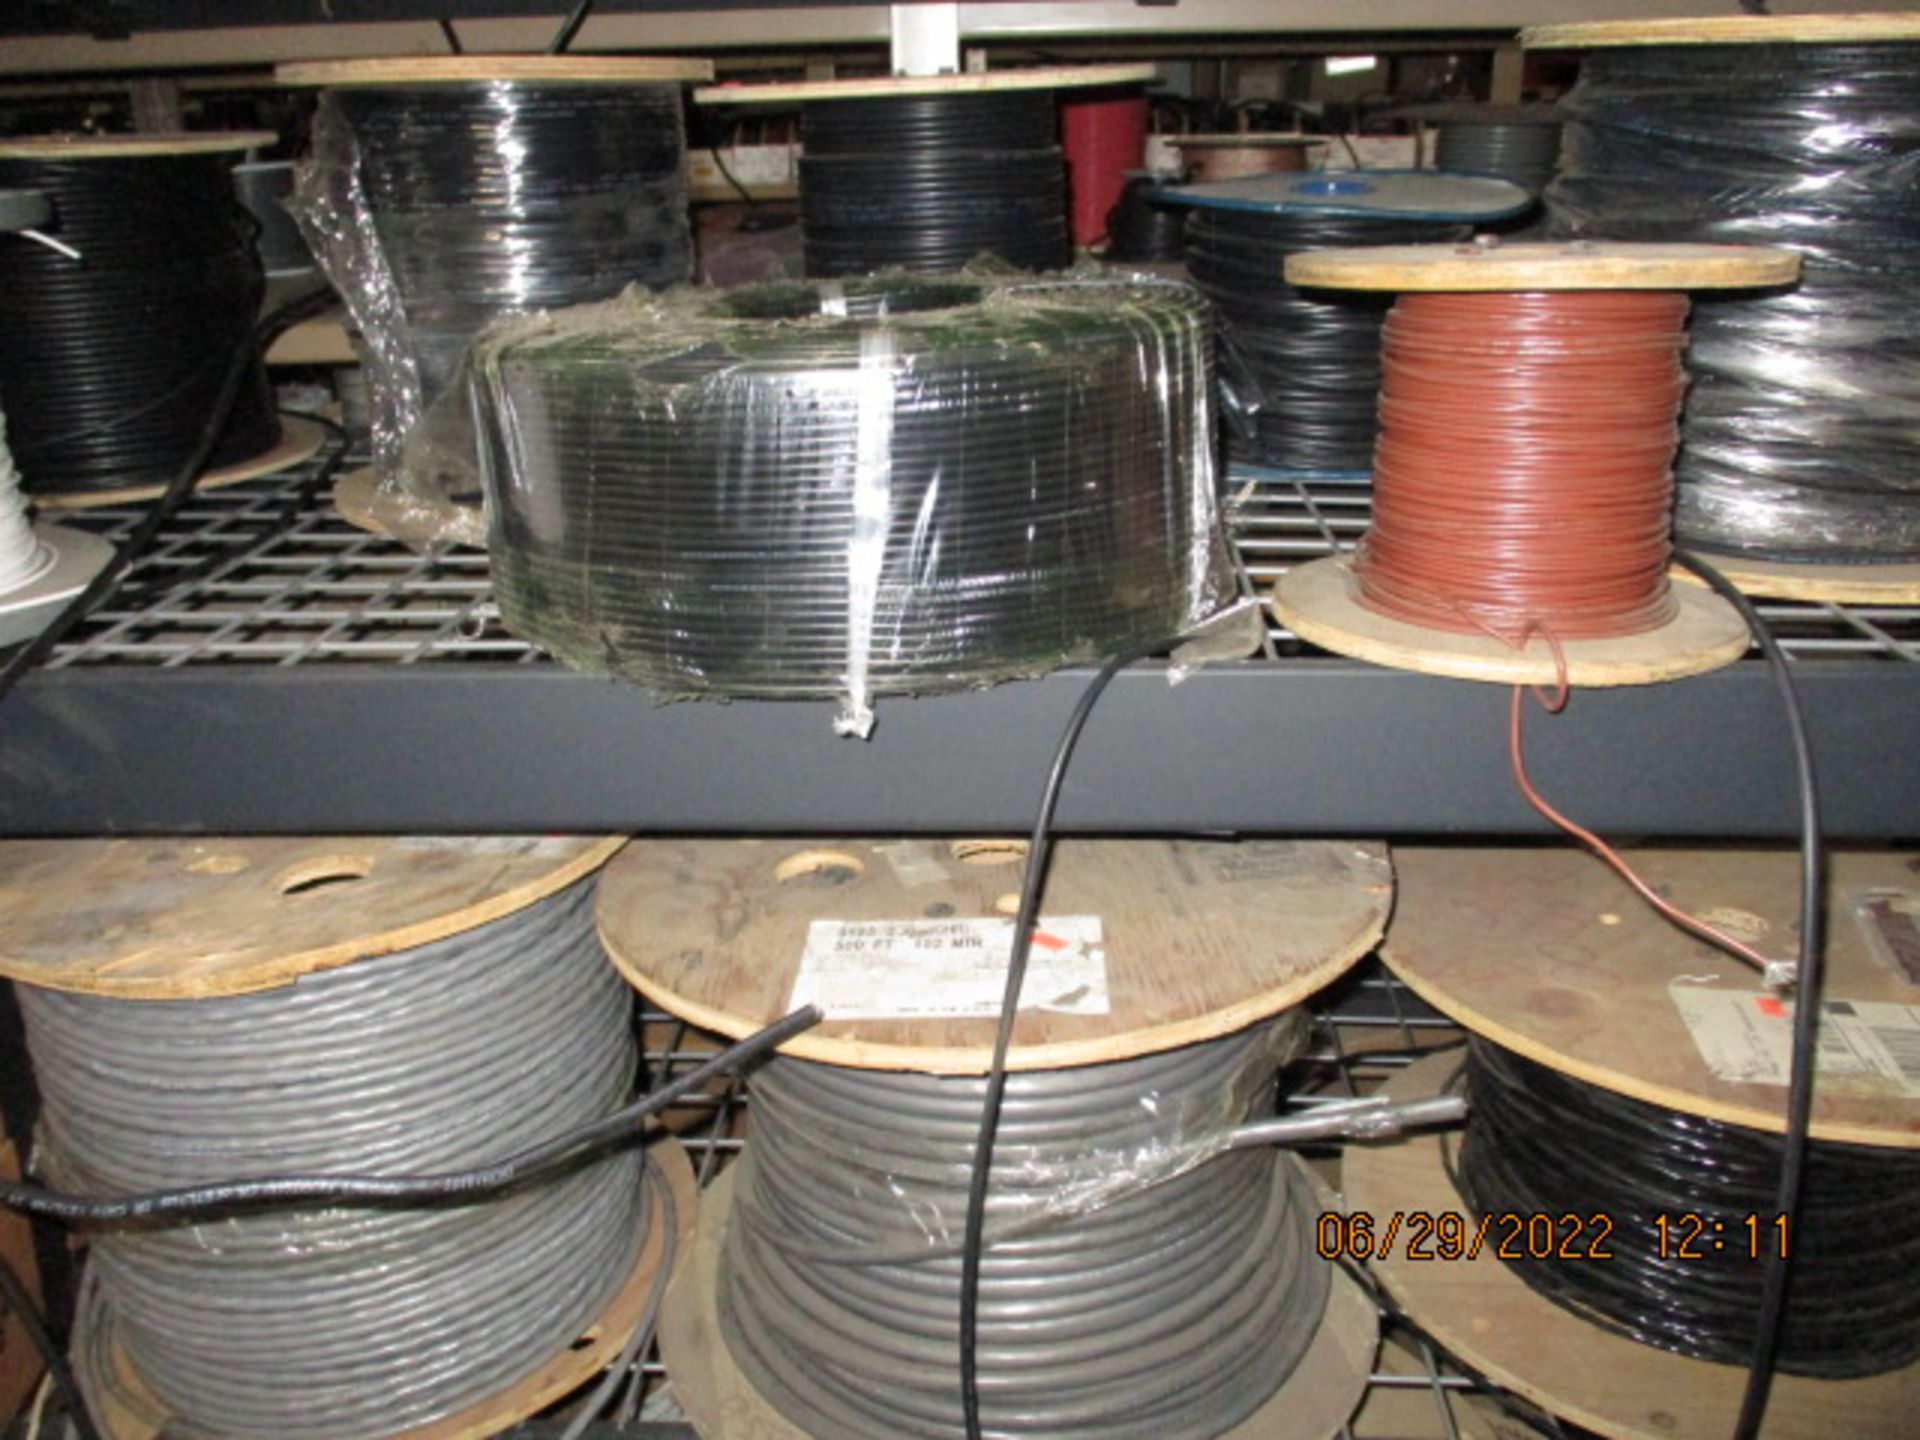 CONTENTS OF SHELVING UNIT CONSISTING OF ASSORTMENT OF CABLE/WIRE - Image 6 of 10